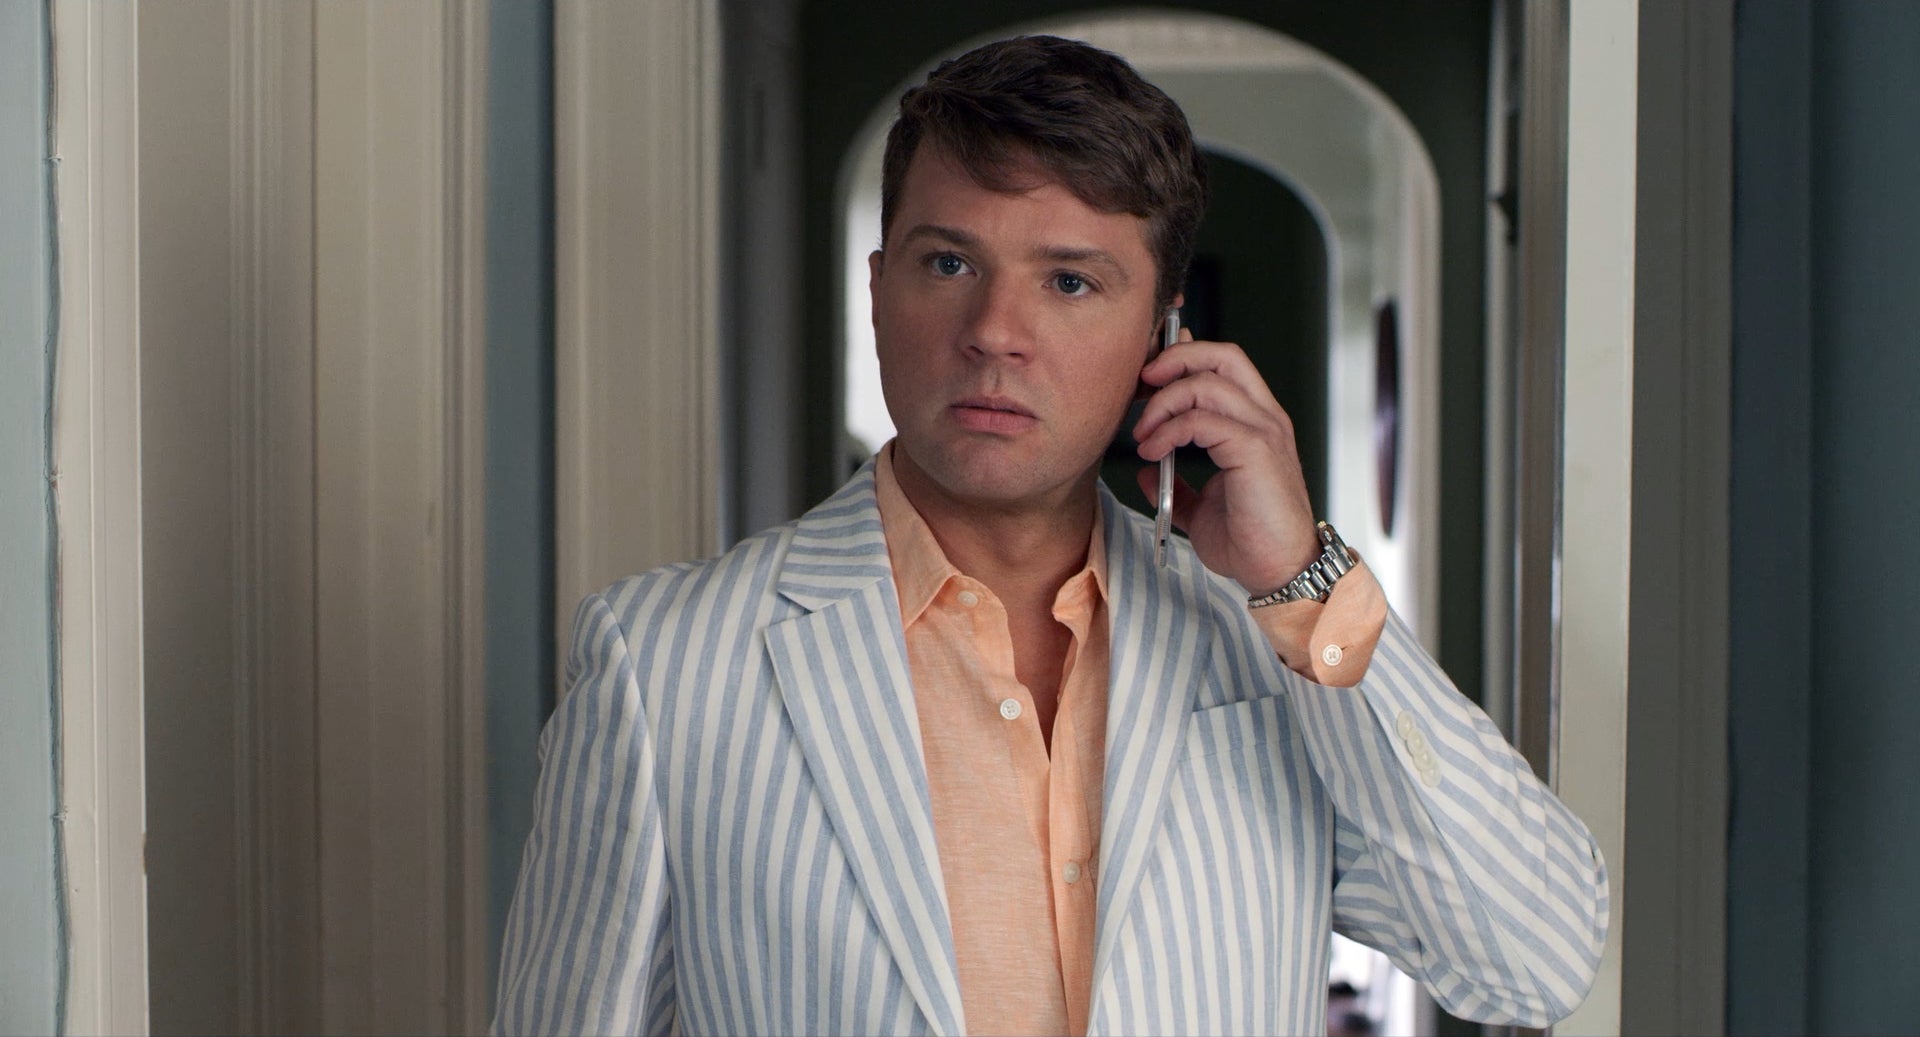 Tanner (Ryan Philippe) makes a face while taking a call. (Image: Lionsgate)